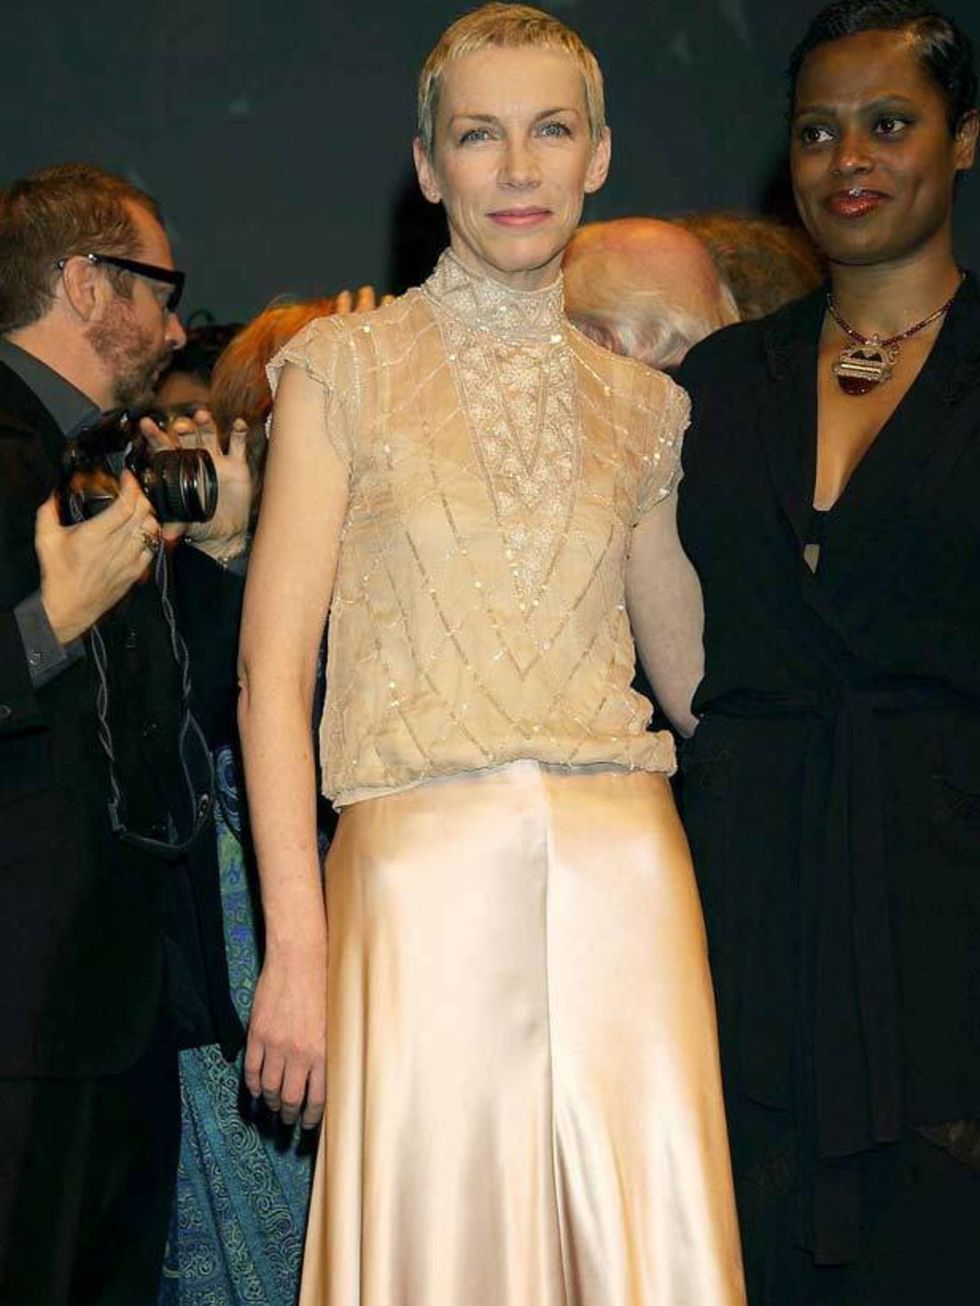 <p><a href="http://www.elleuk.com/content/search?SearchText=Annie+Lennox&amp;SearchButton=Search">Annie Lennox</a> at a gala evening for 'When Love Speaks Its Name' at the Old Vic, London, February 2002</p>